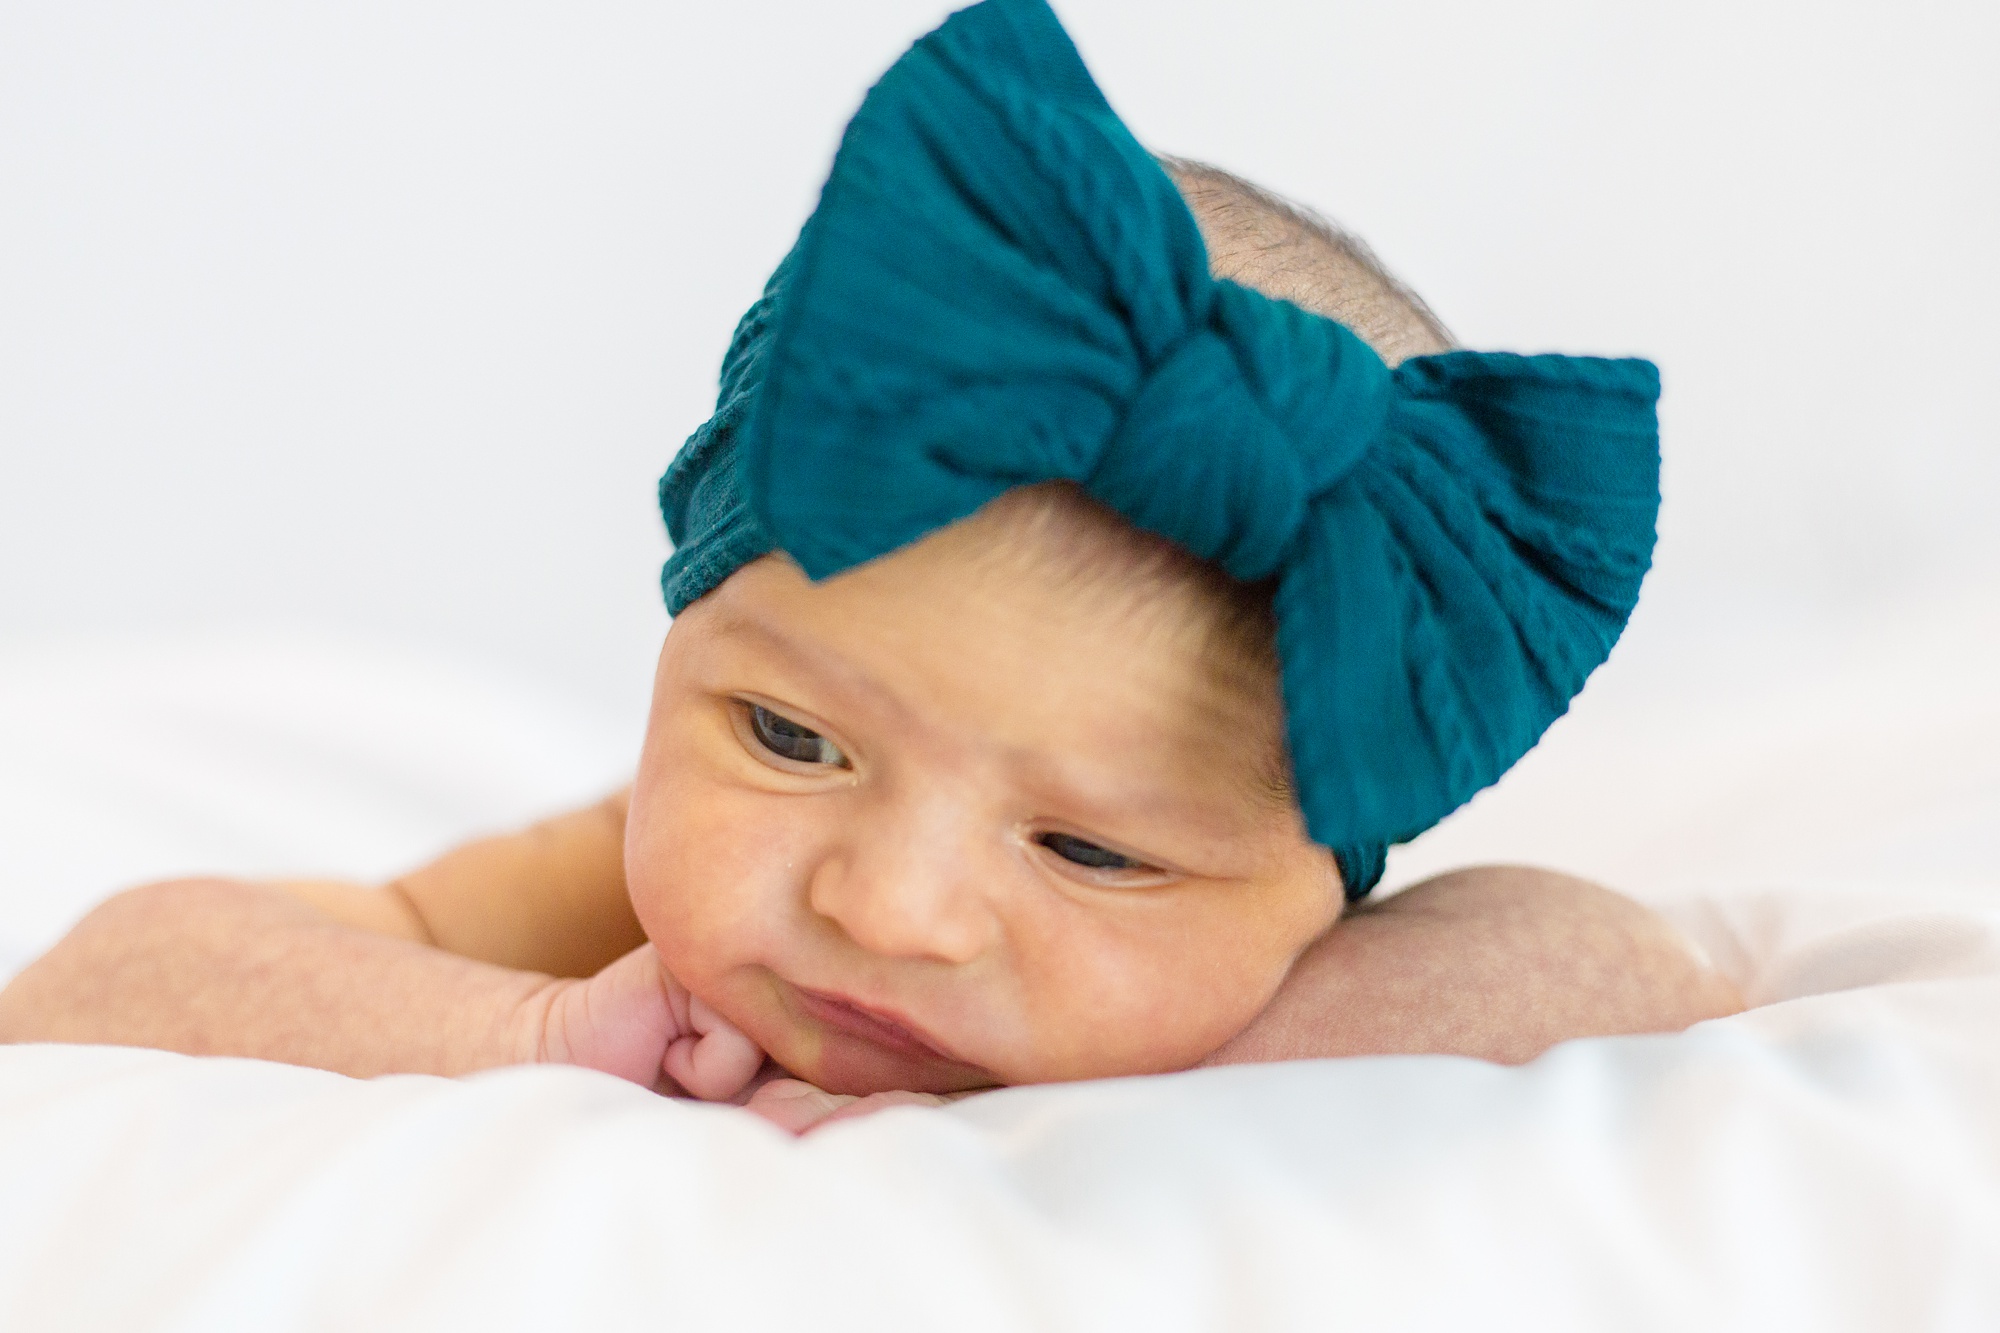 Lifestyle Newborn Session portraits of baby girl with teal bow